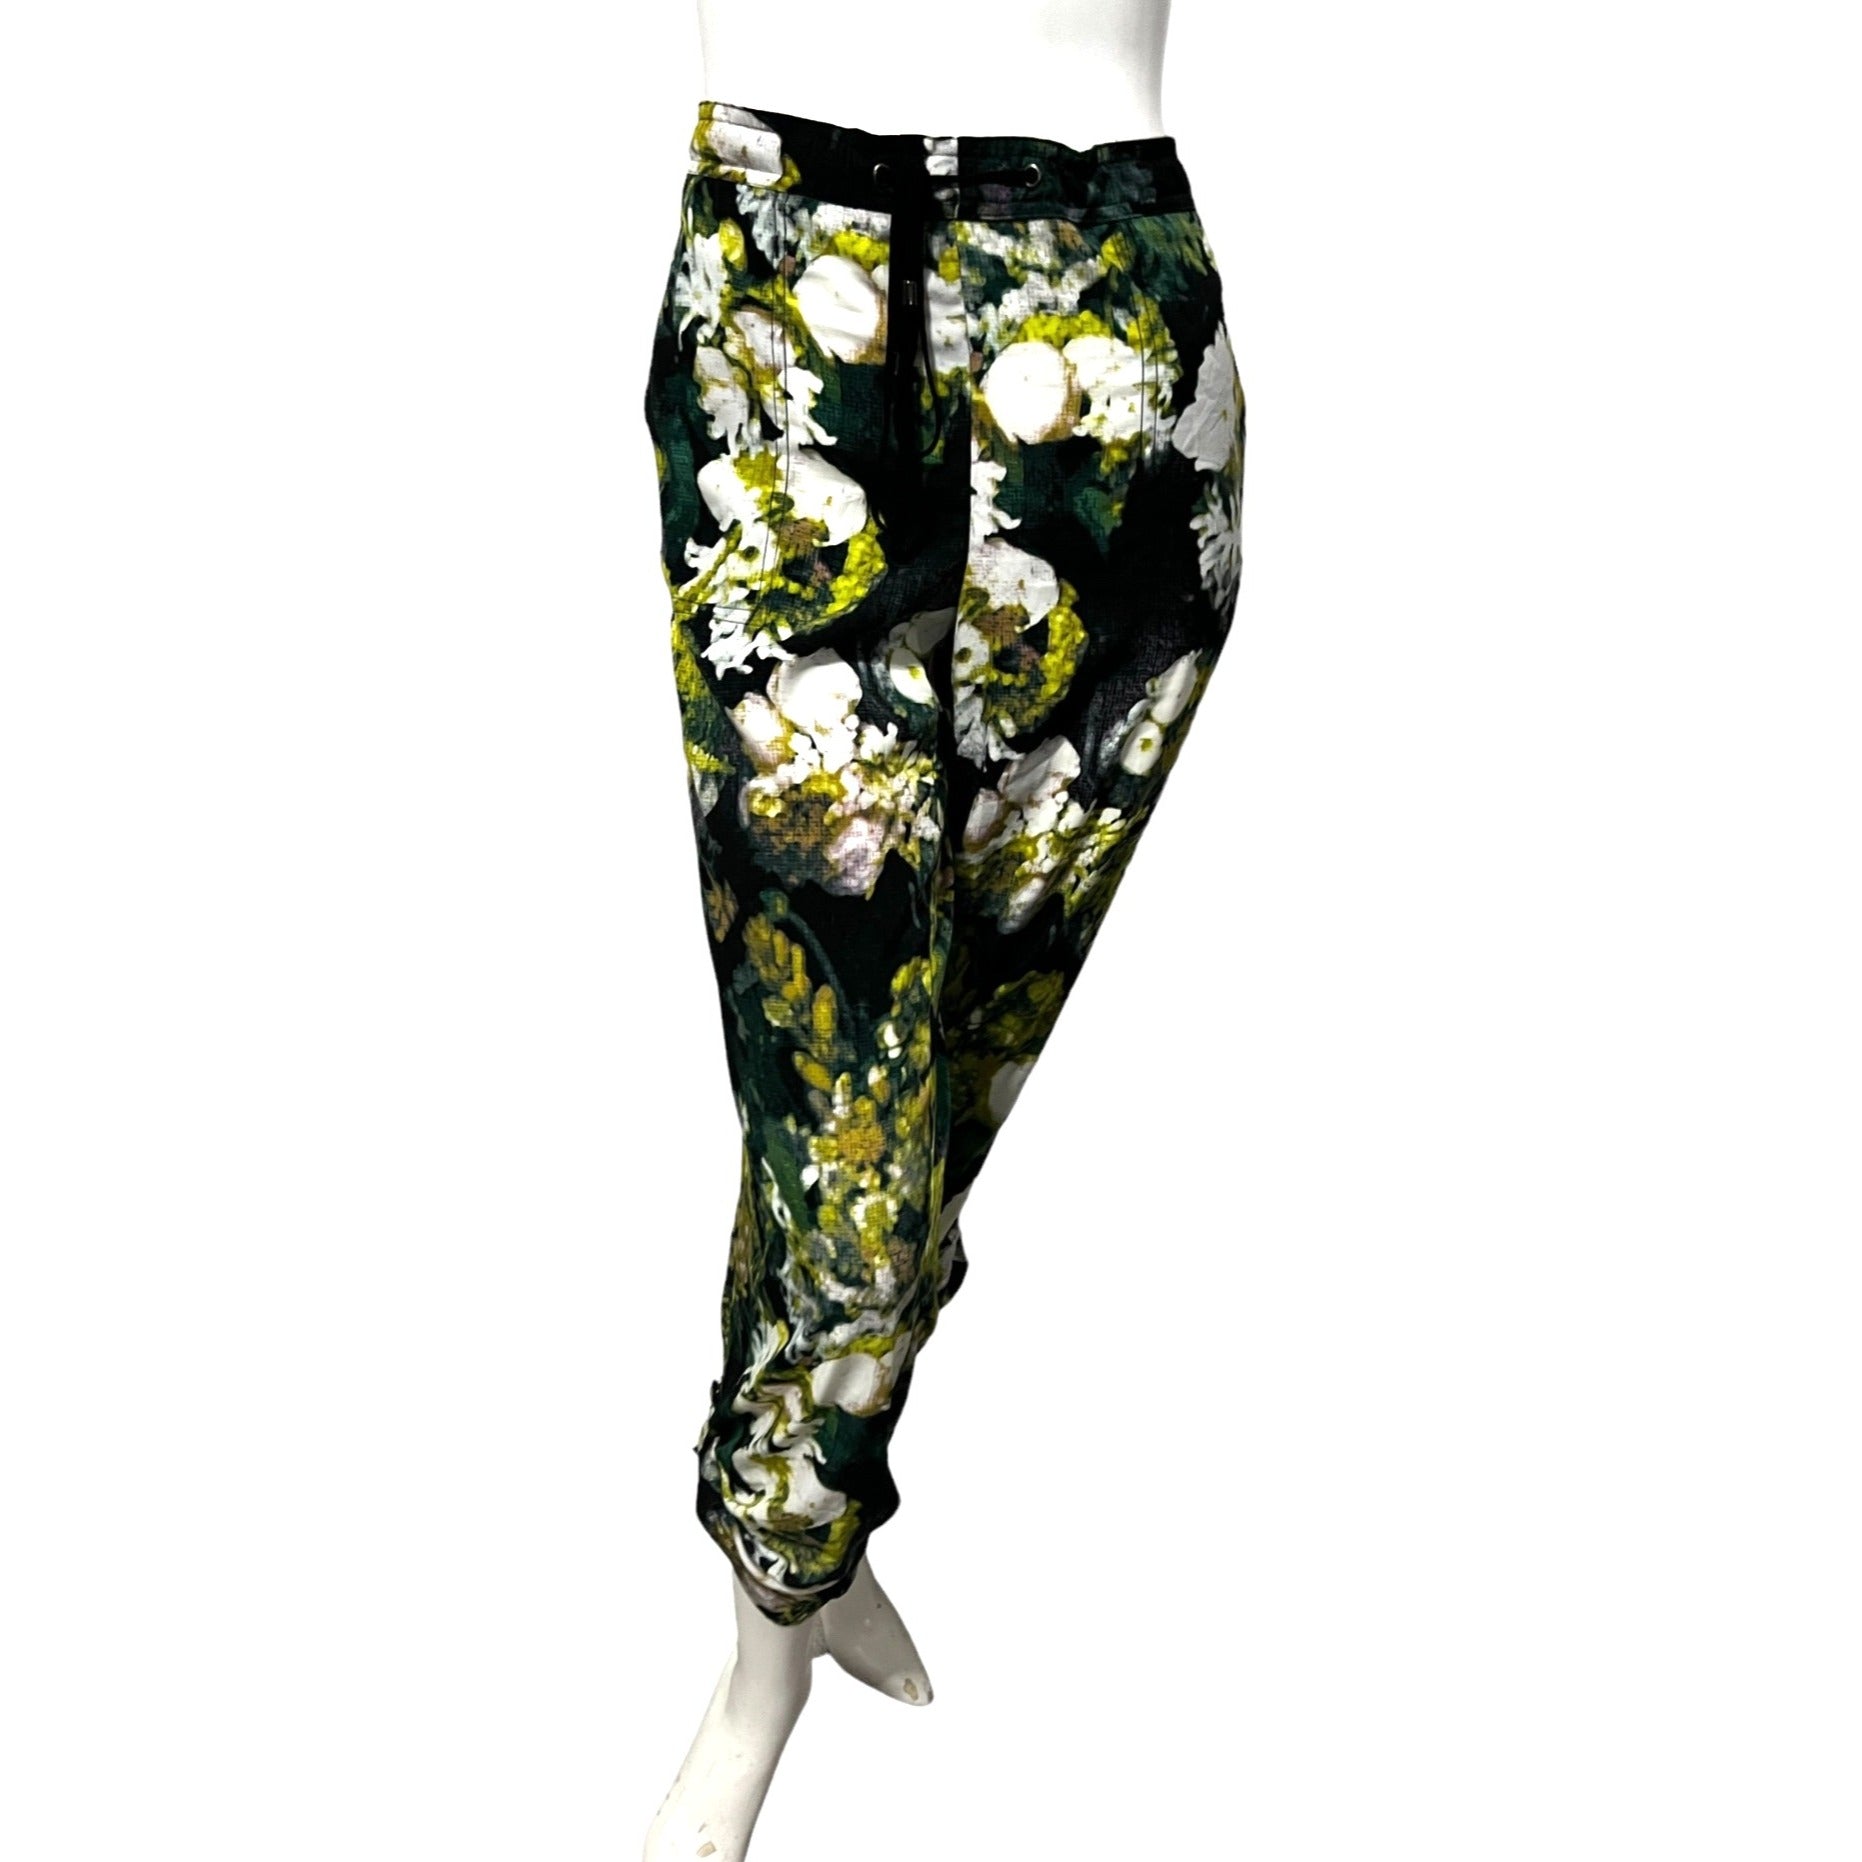 Adrianna Papell Floral Abstract Cuffed Breezy Pants Sz 6 Womens Multi Color